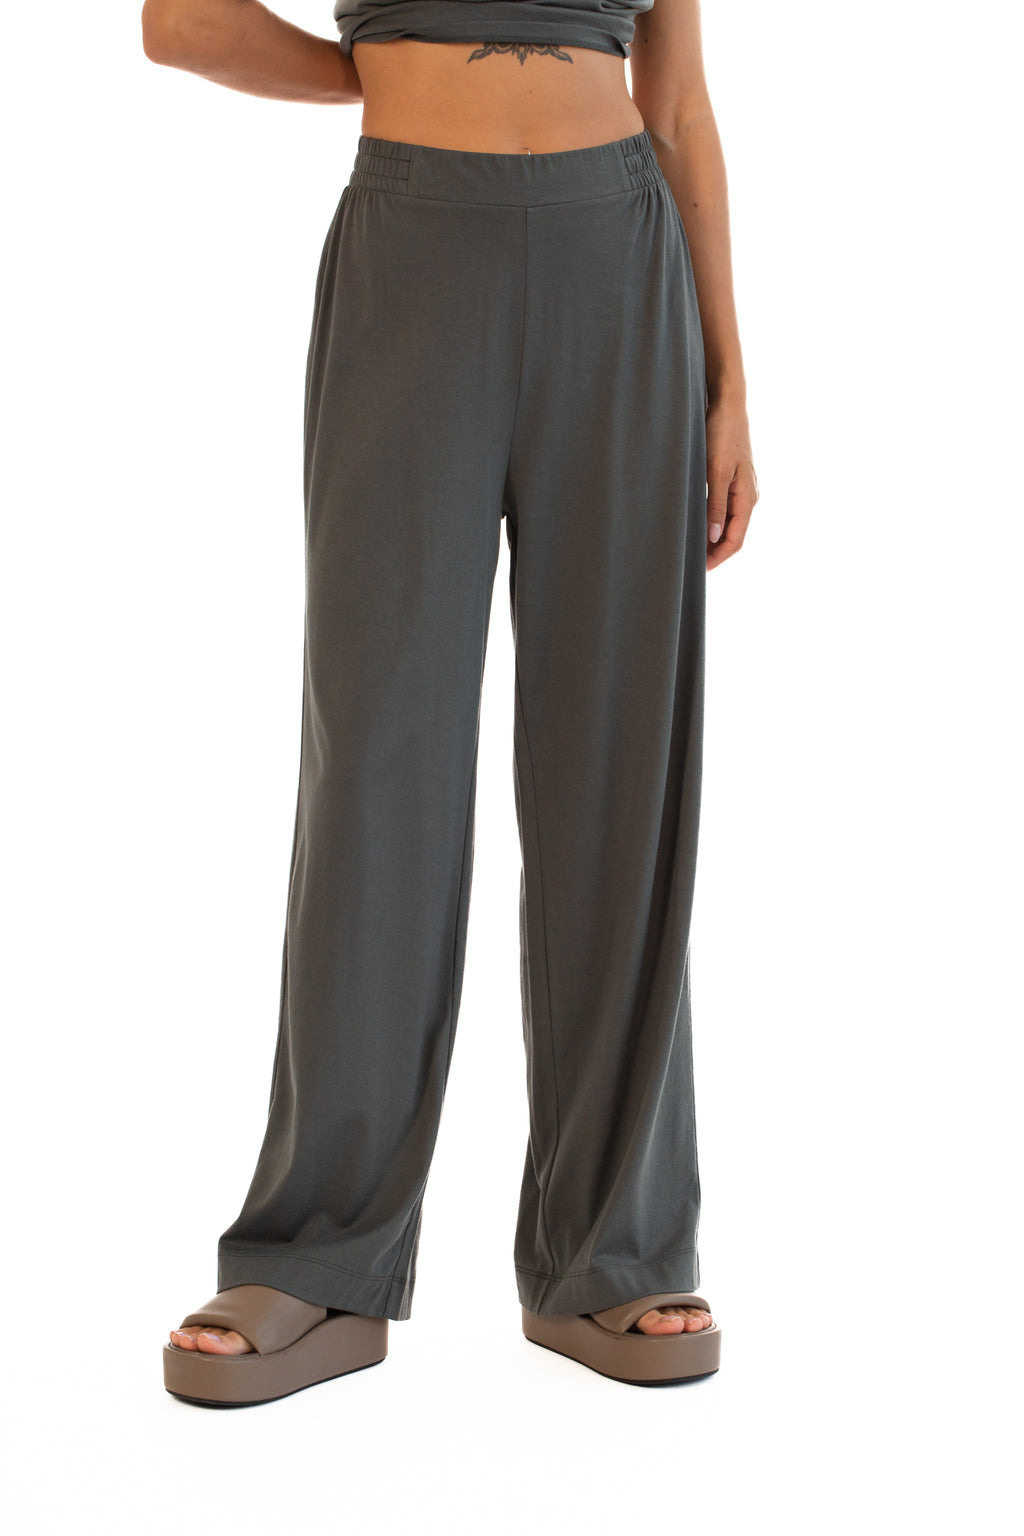 Women's High-Rise Relaxed Fit Baggy Wide Leg Trousers - A New Day™ Brown 26